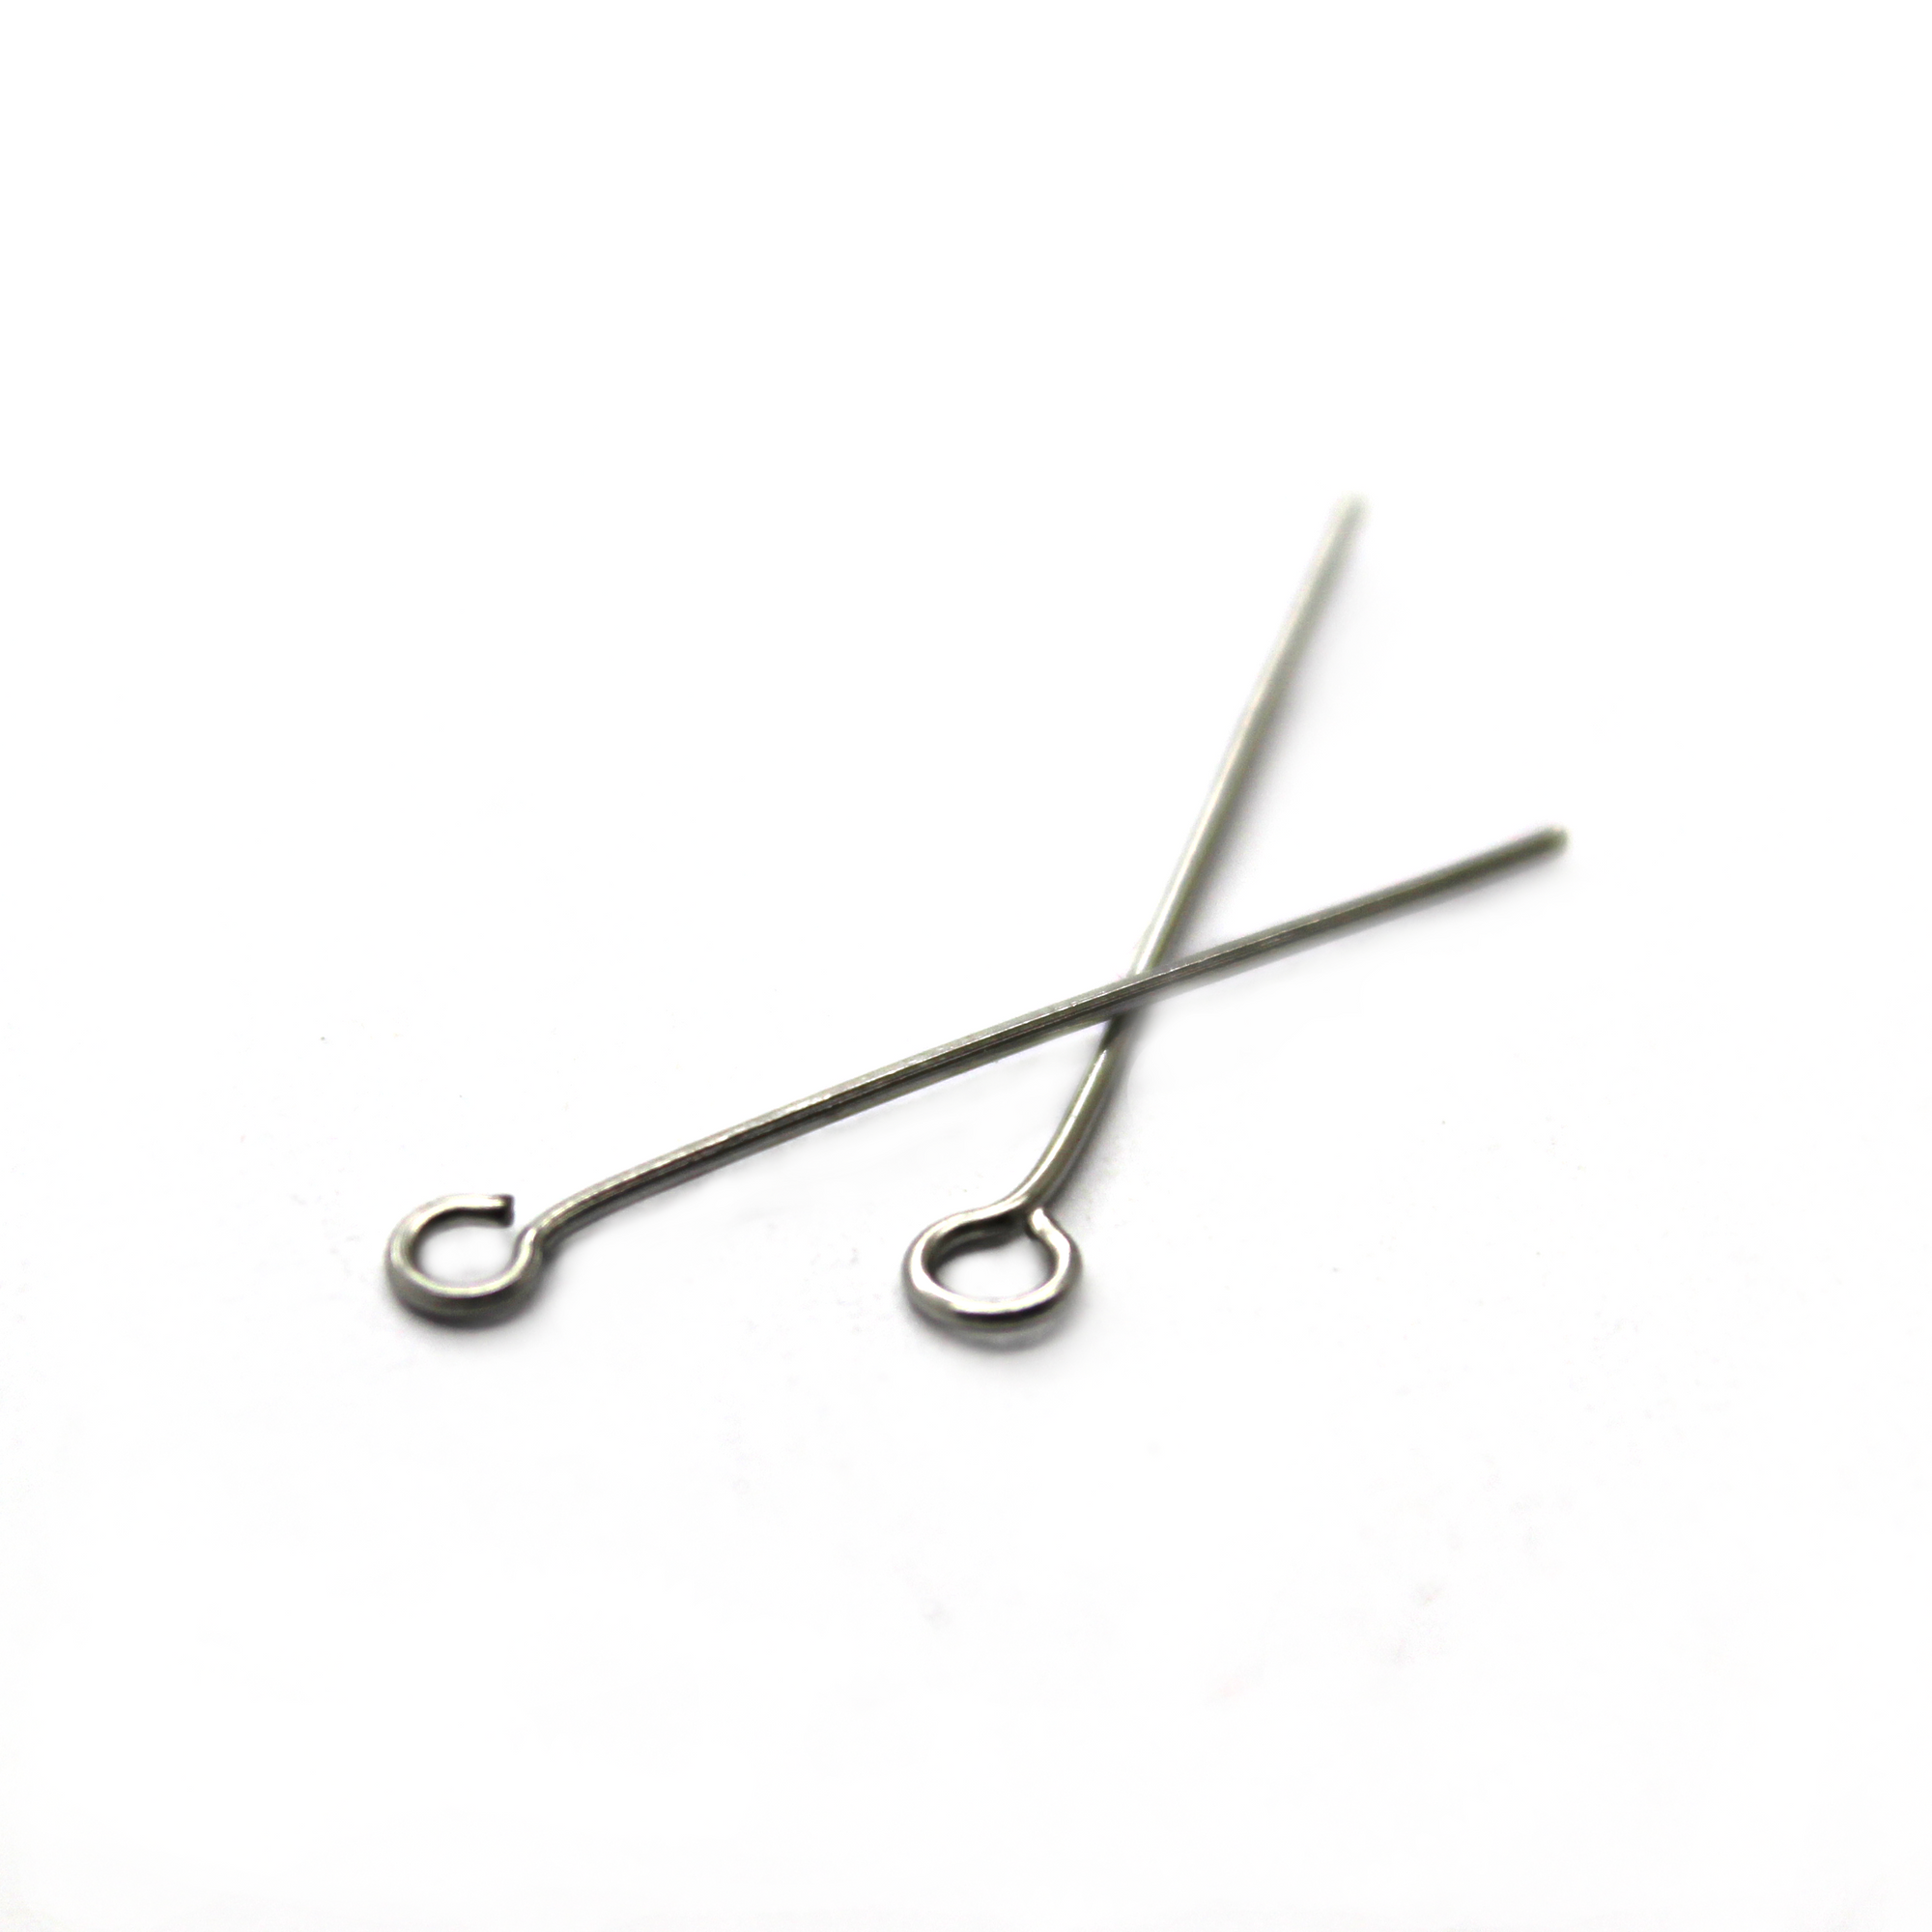 Spinpoler 100pcs Stainless Steel Pins For Round Lead Cheburashka